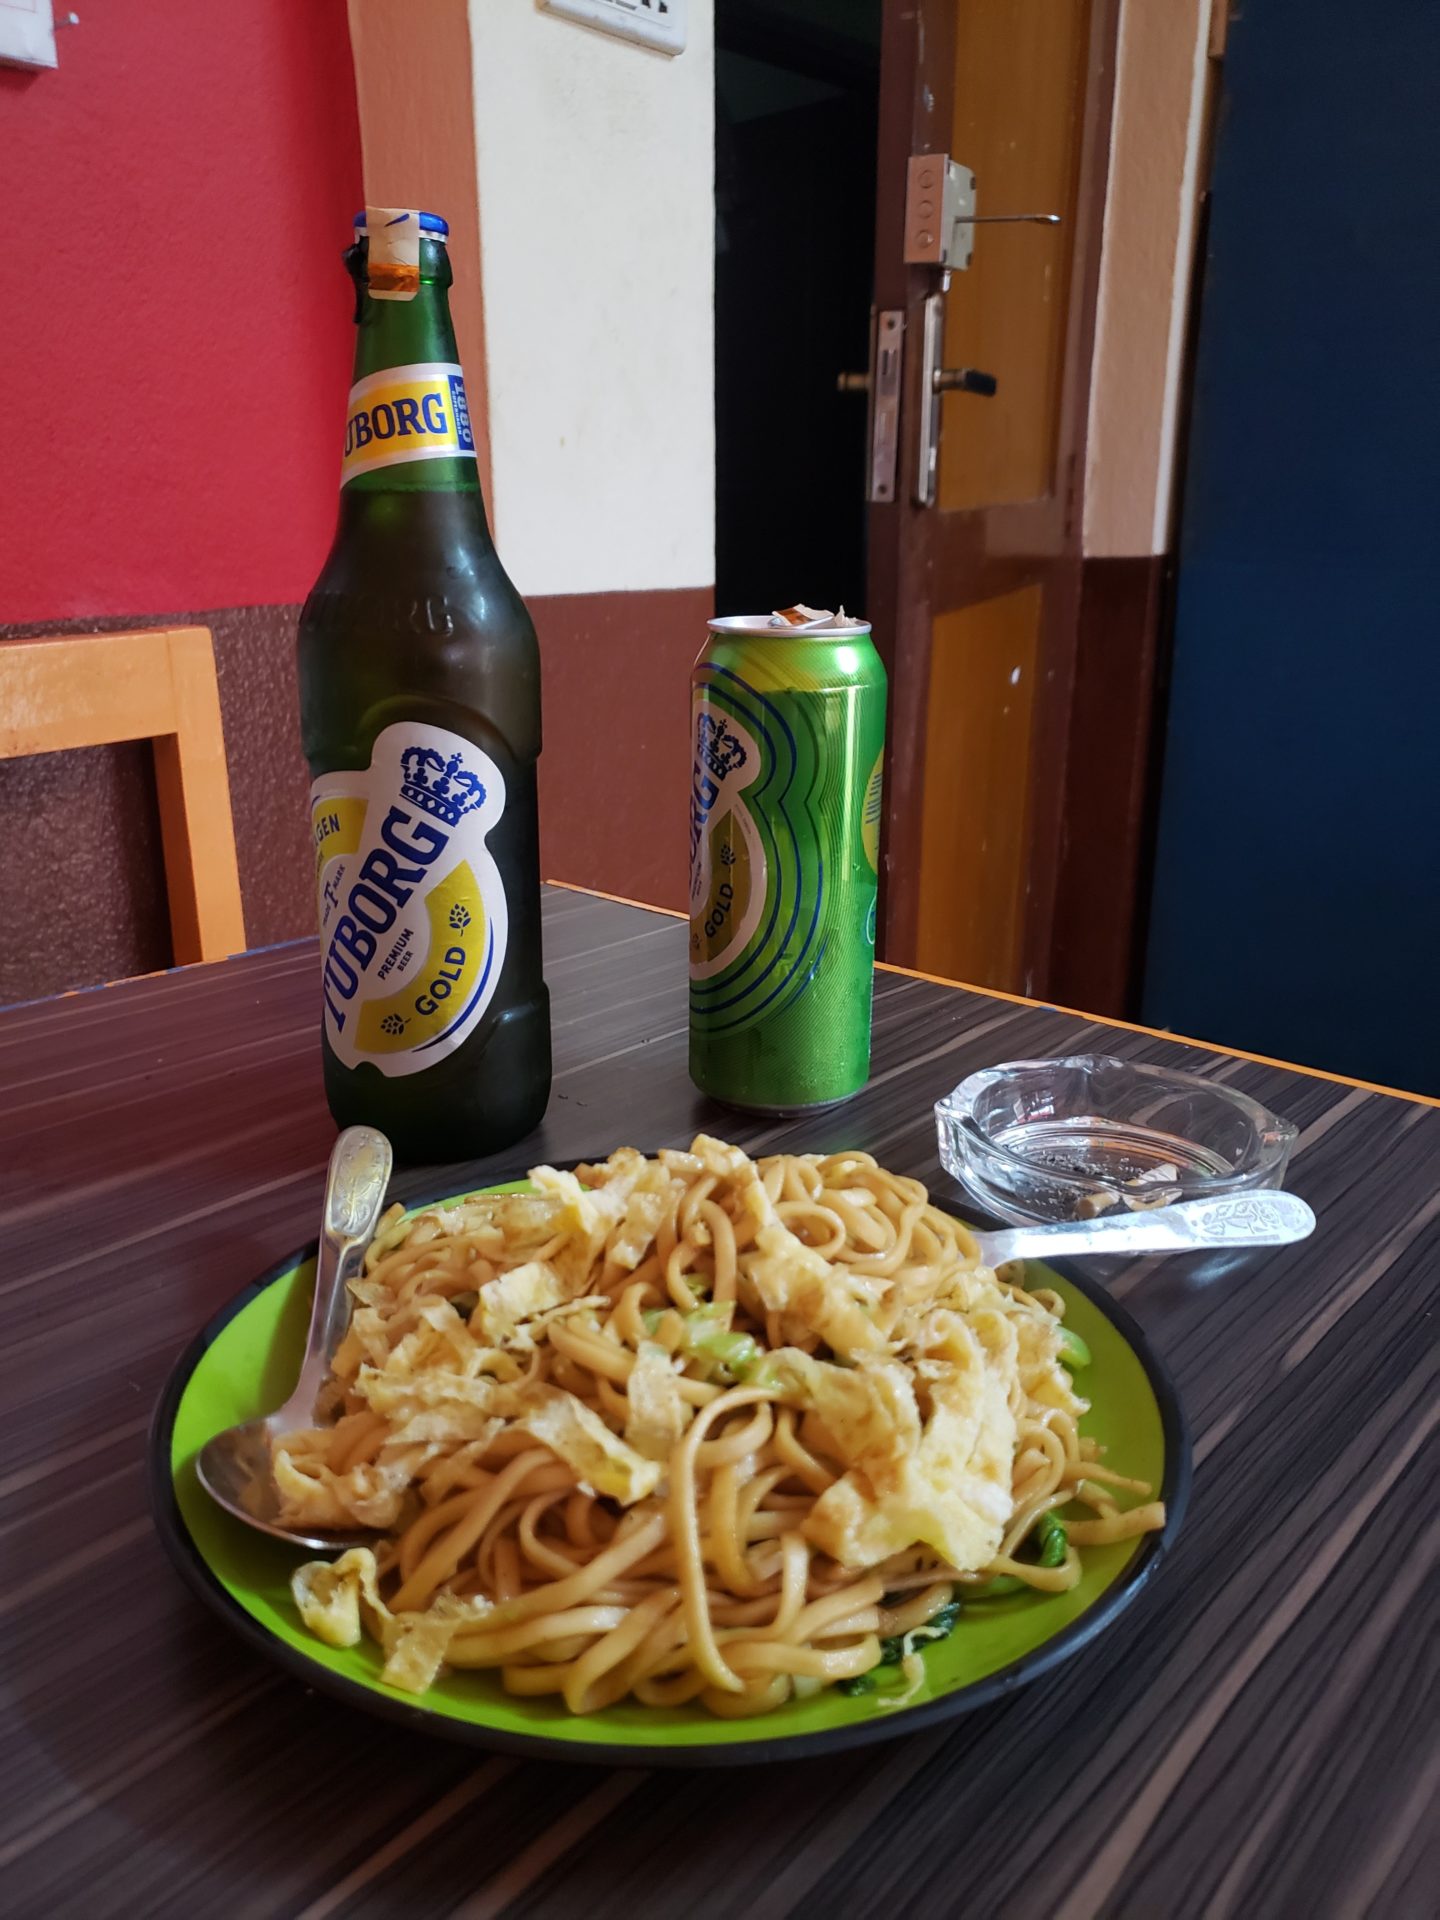 a plate of food and two beer bottles on a table